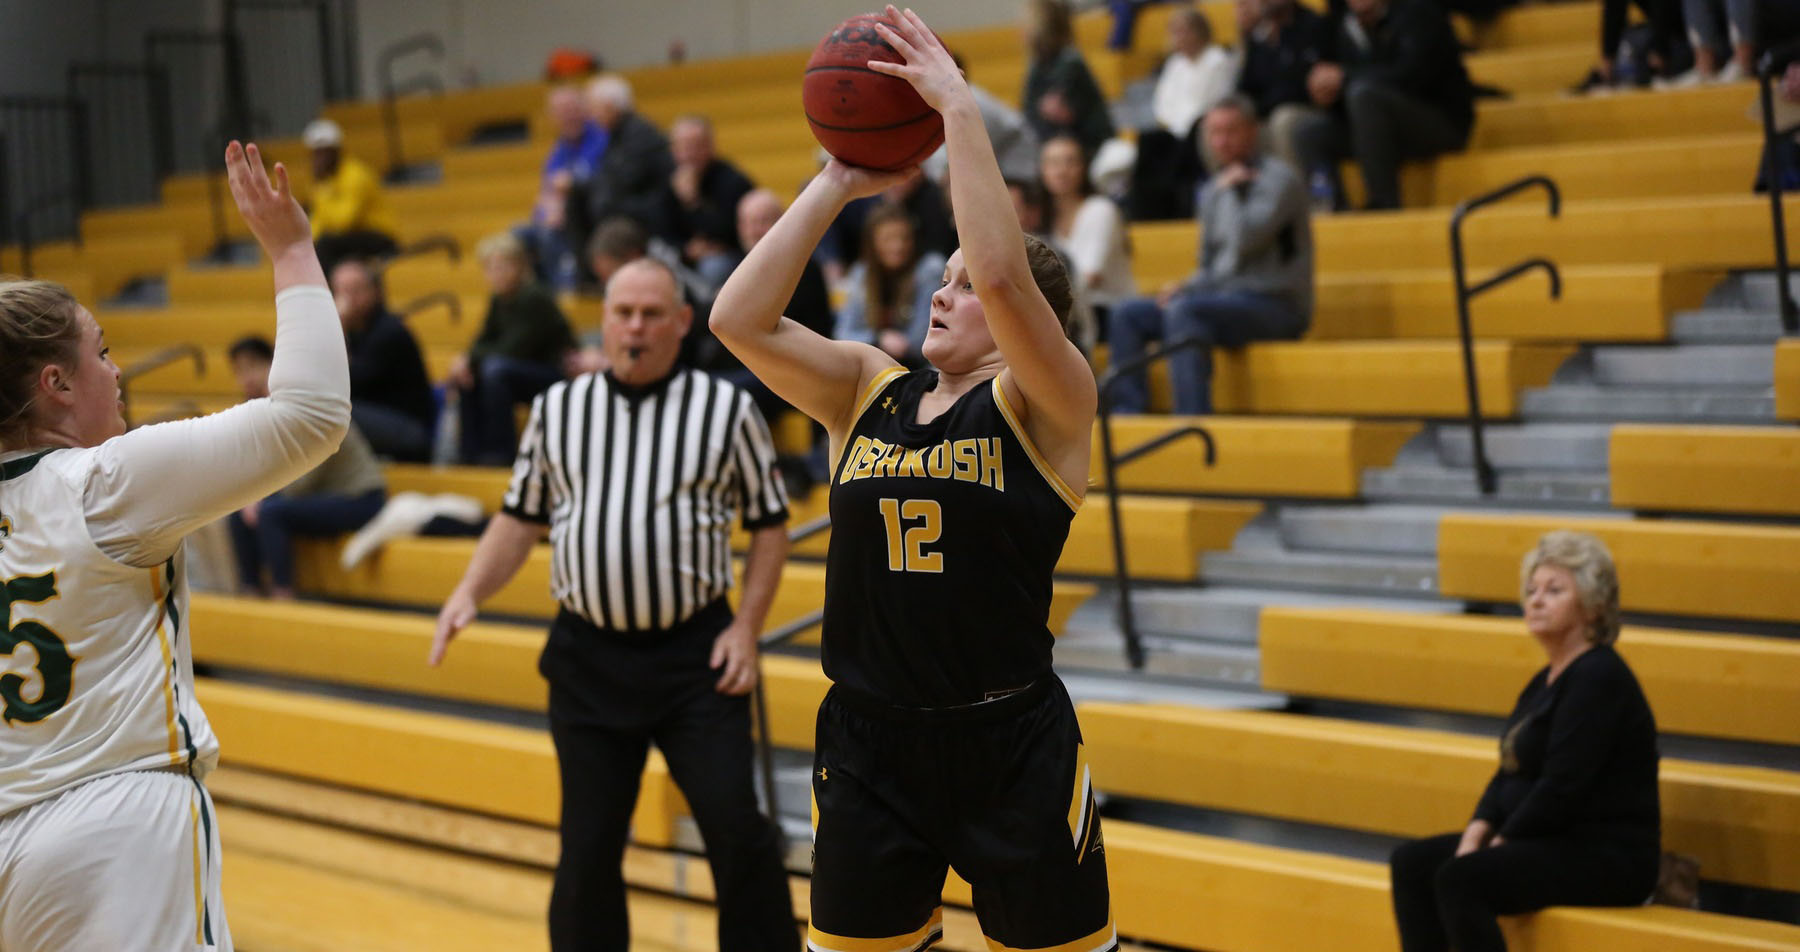 Leah Porath scored 18 points with two rebounds against the Red Hawks.